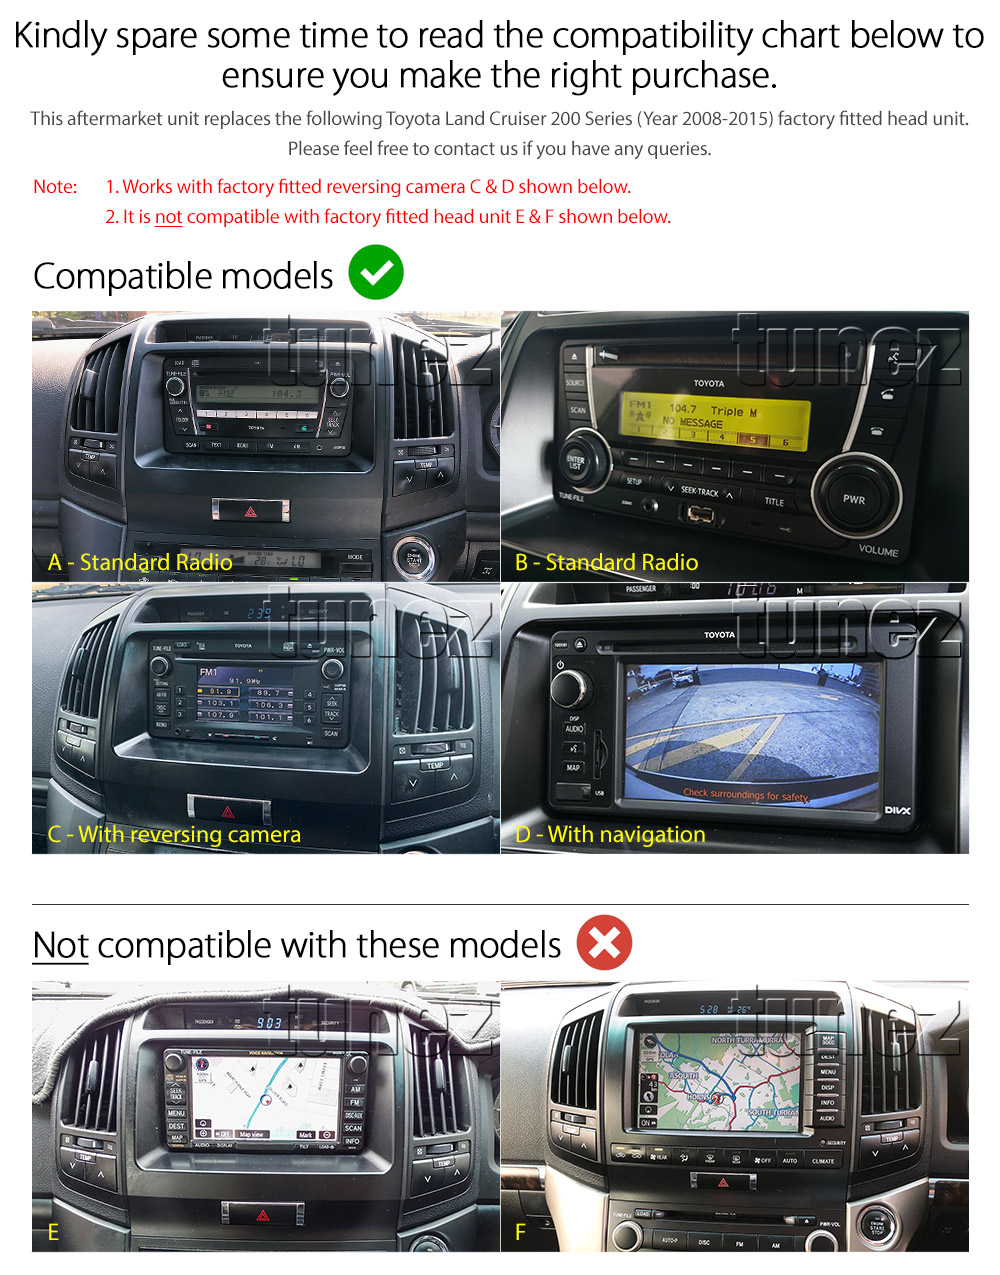 SRRTLC09AND GPS Aftermarket Toyota Land Cruiser Landcruiser 200 Series J200 Year 2008 2009 2010 2011 2012 2013 2014 2015 capacitive 10 inches touchscreen Universal Double DIN Latest Australia UK European Apple CarPlay Android Auto 10 Car USB player radio stereo 4G LTE WiFi head unit details Aftermarket External and Internal Microphone Bluetooth Europe Sat Nav Navi Plug and Play ISO Plug Wiring Harness Matching Fascia Kit Facia Free Reversing Camera Album Art ID3 Tag RMVB MP3 MP4 AVI MKV Full High Definition FHD 1080p DAB+ Digital Radio DAB + Connects2 CTSTY008.2 CTSTY00C CTSTY00CAMP CTSTY013.2